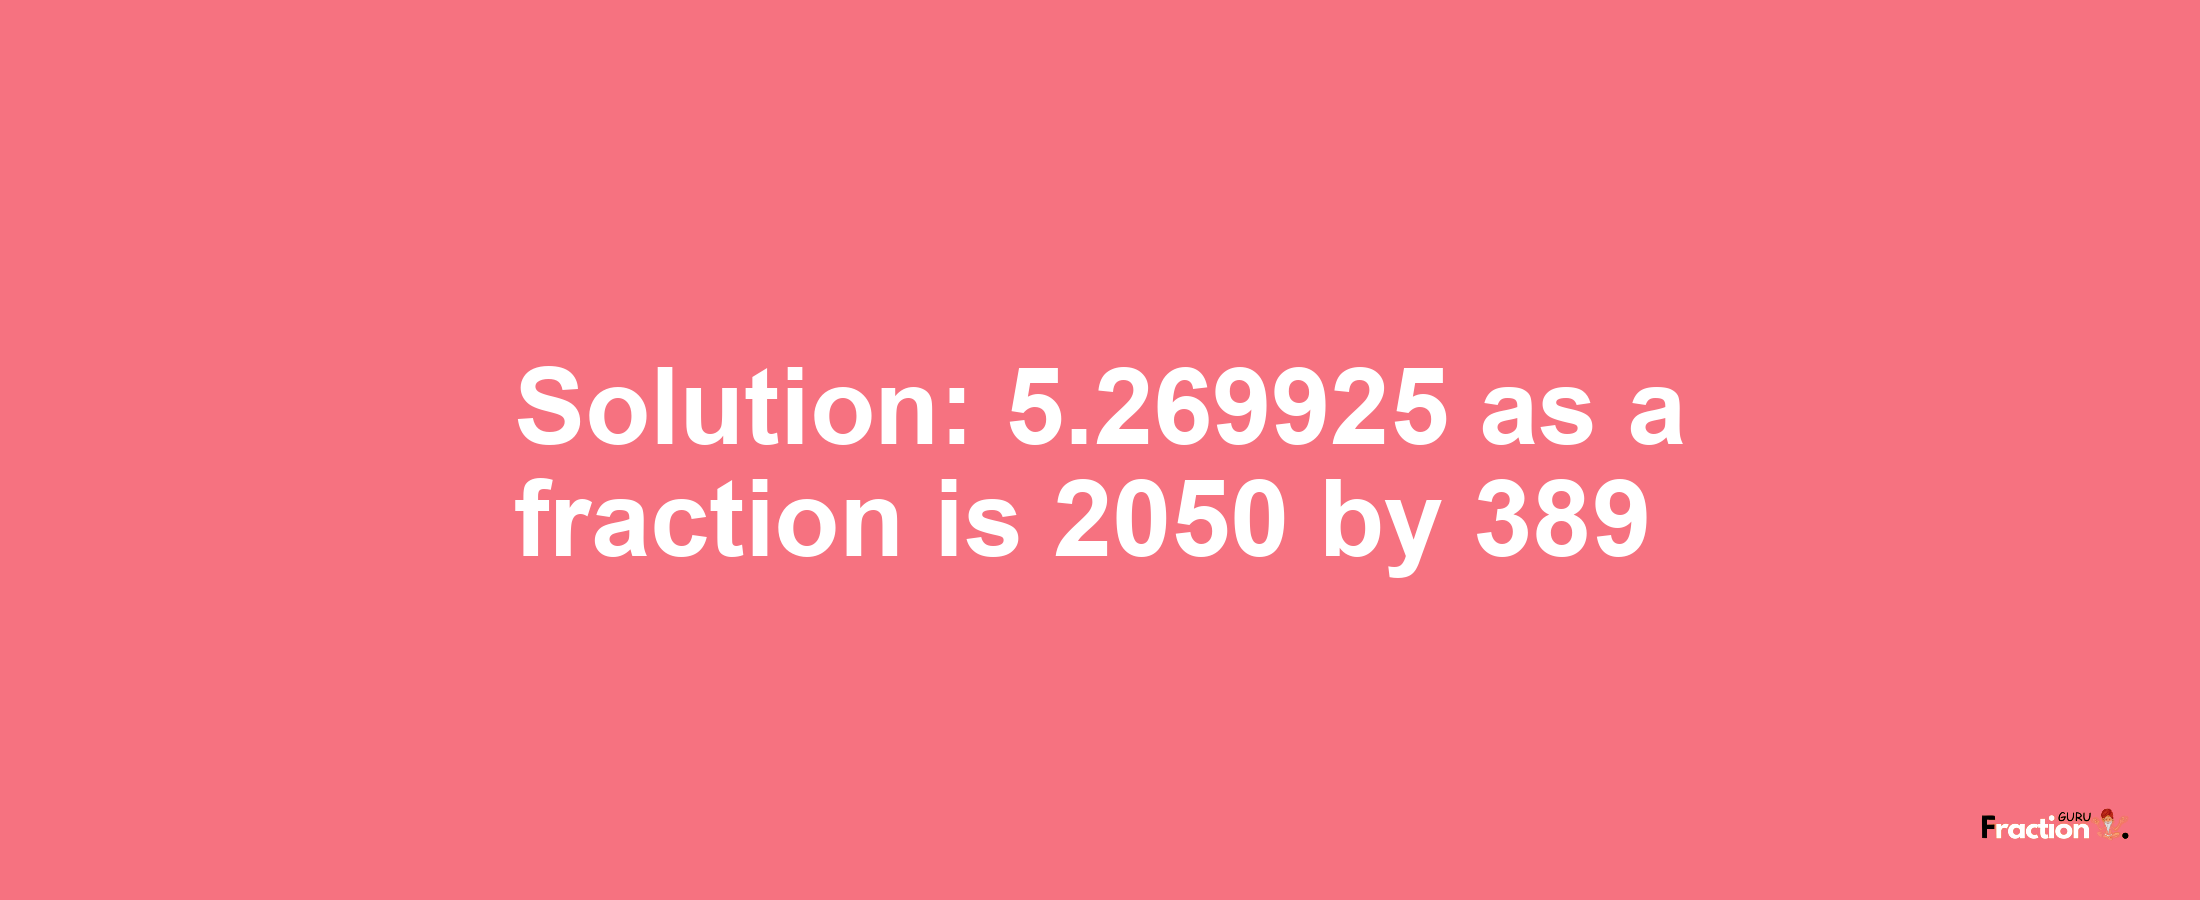 Solution:5.269925 as a fraction is 2050/389